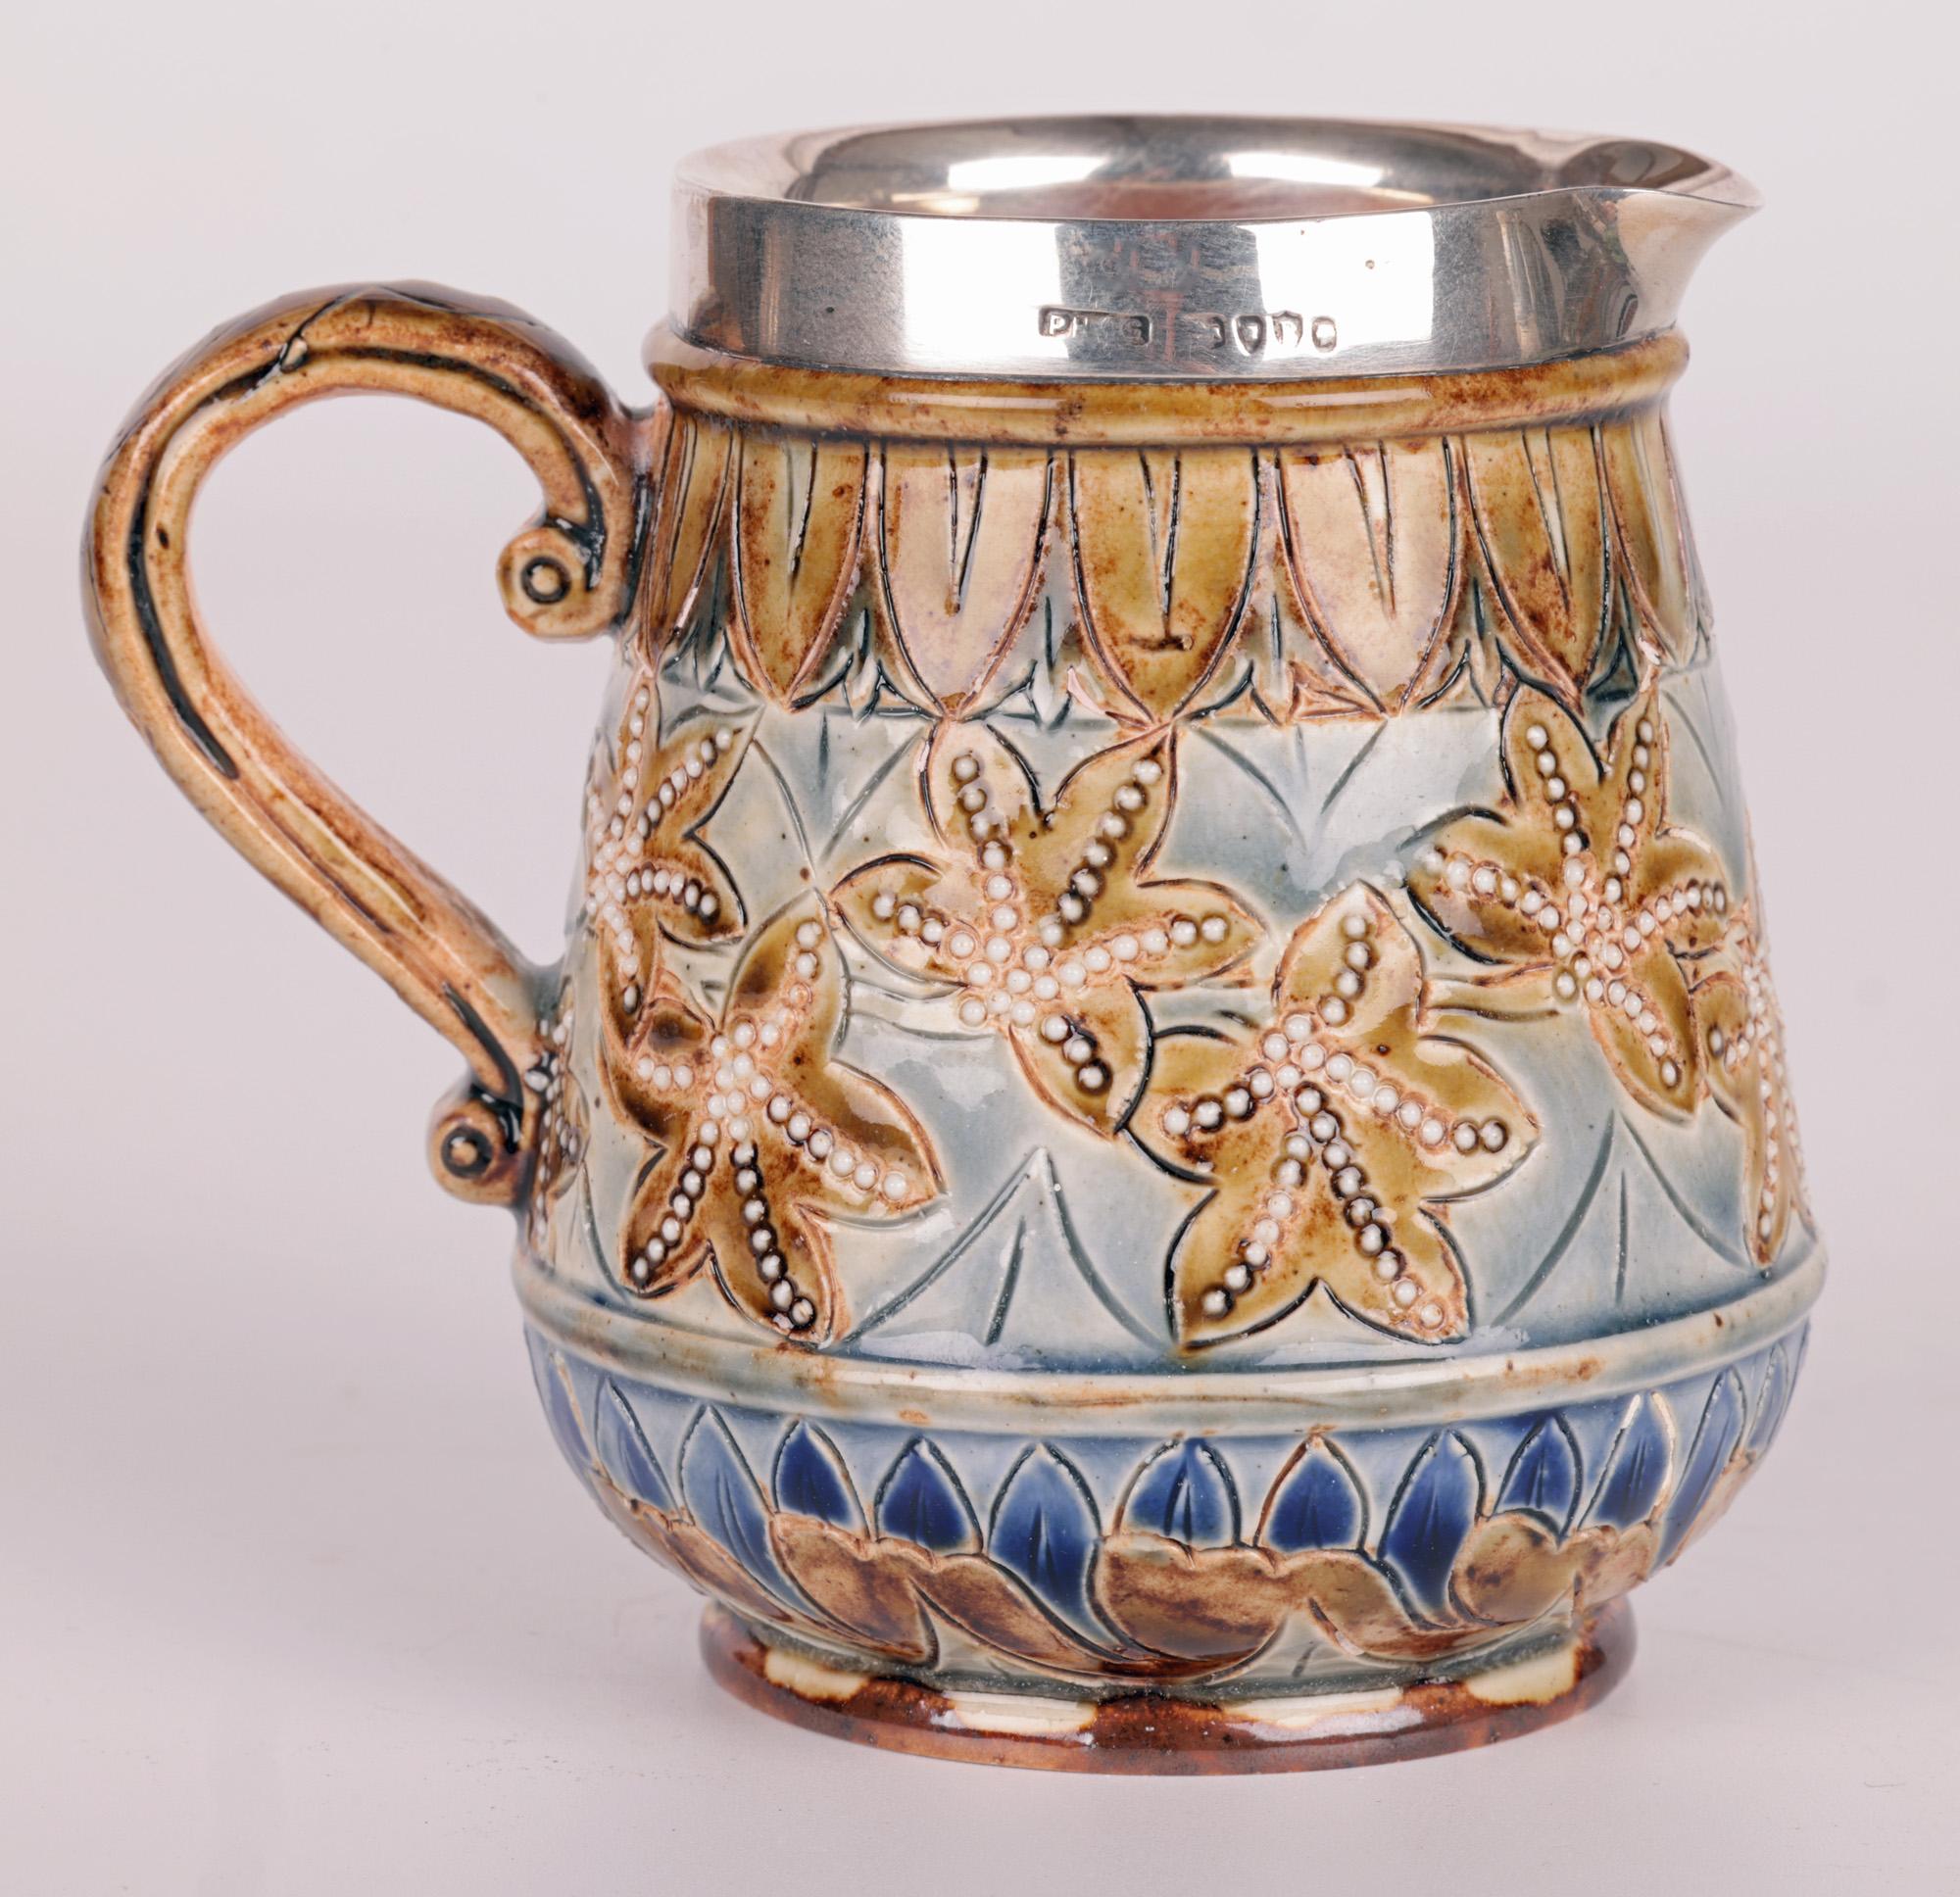 Doulton Lambeth Silver Mounted Cream Jug by Francis E Lee, 1877 For Sale 3